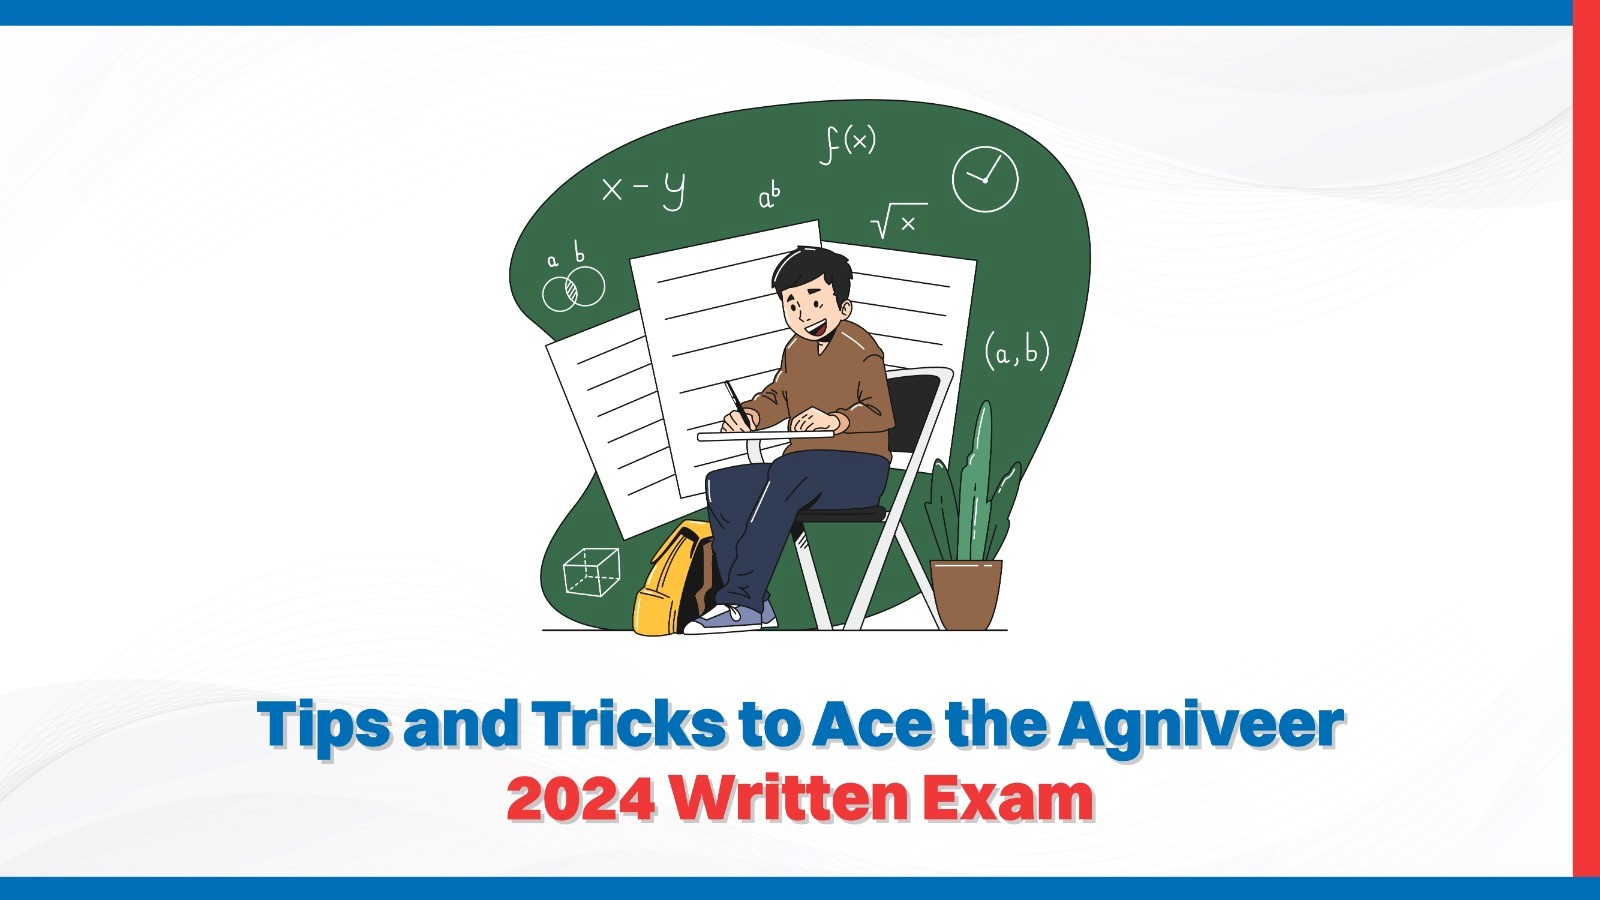 Tips and Tricks to Ace the Agniveer 2024 Written Exam.jpg